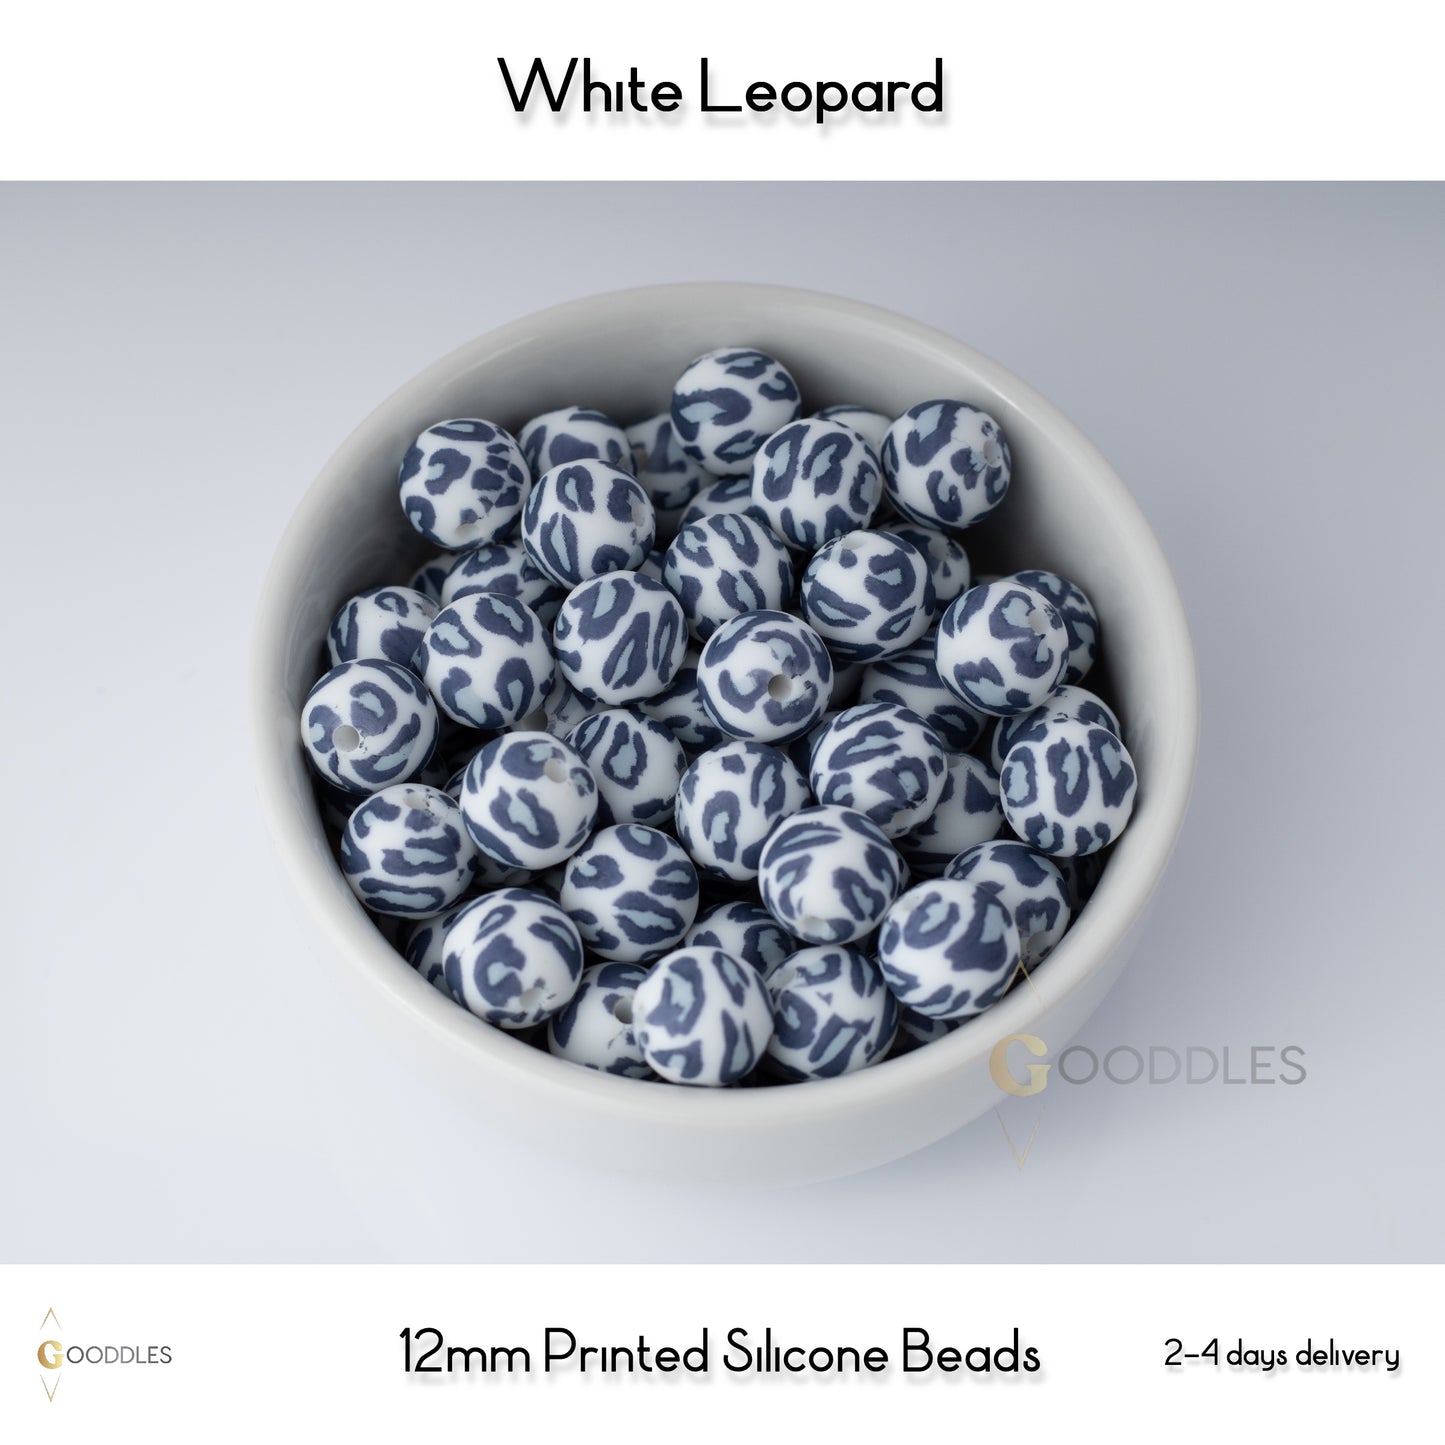 5pcs, White Leopard Silicone Beads Printed Round Silicone Beads